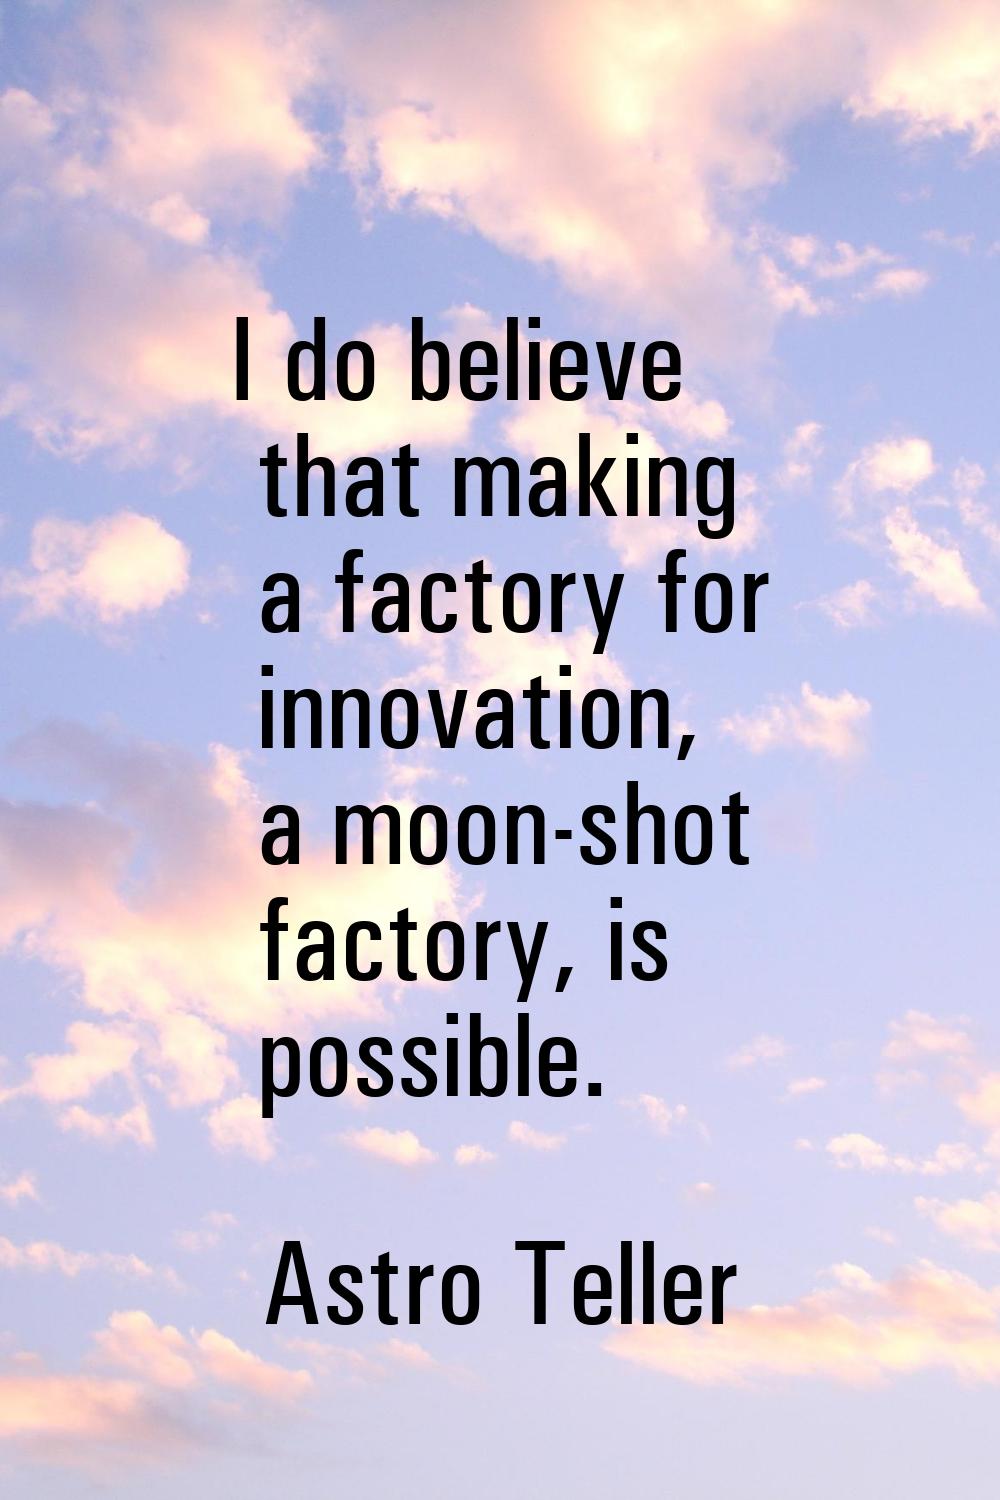 I do believe that making a factory for innovation, a moon-shot factory, is possible.